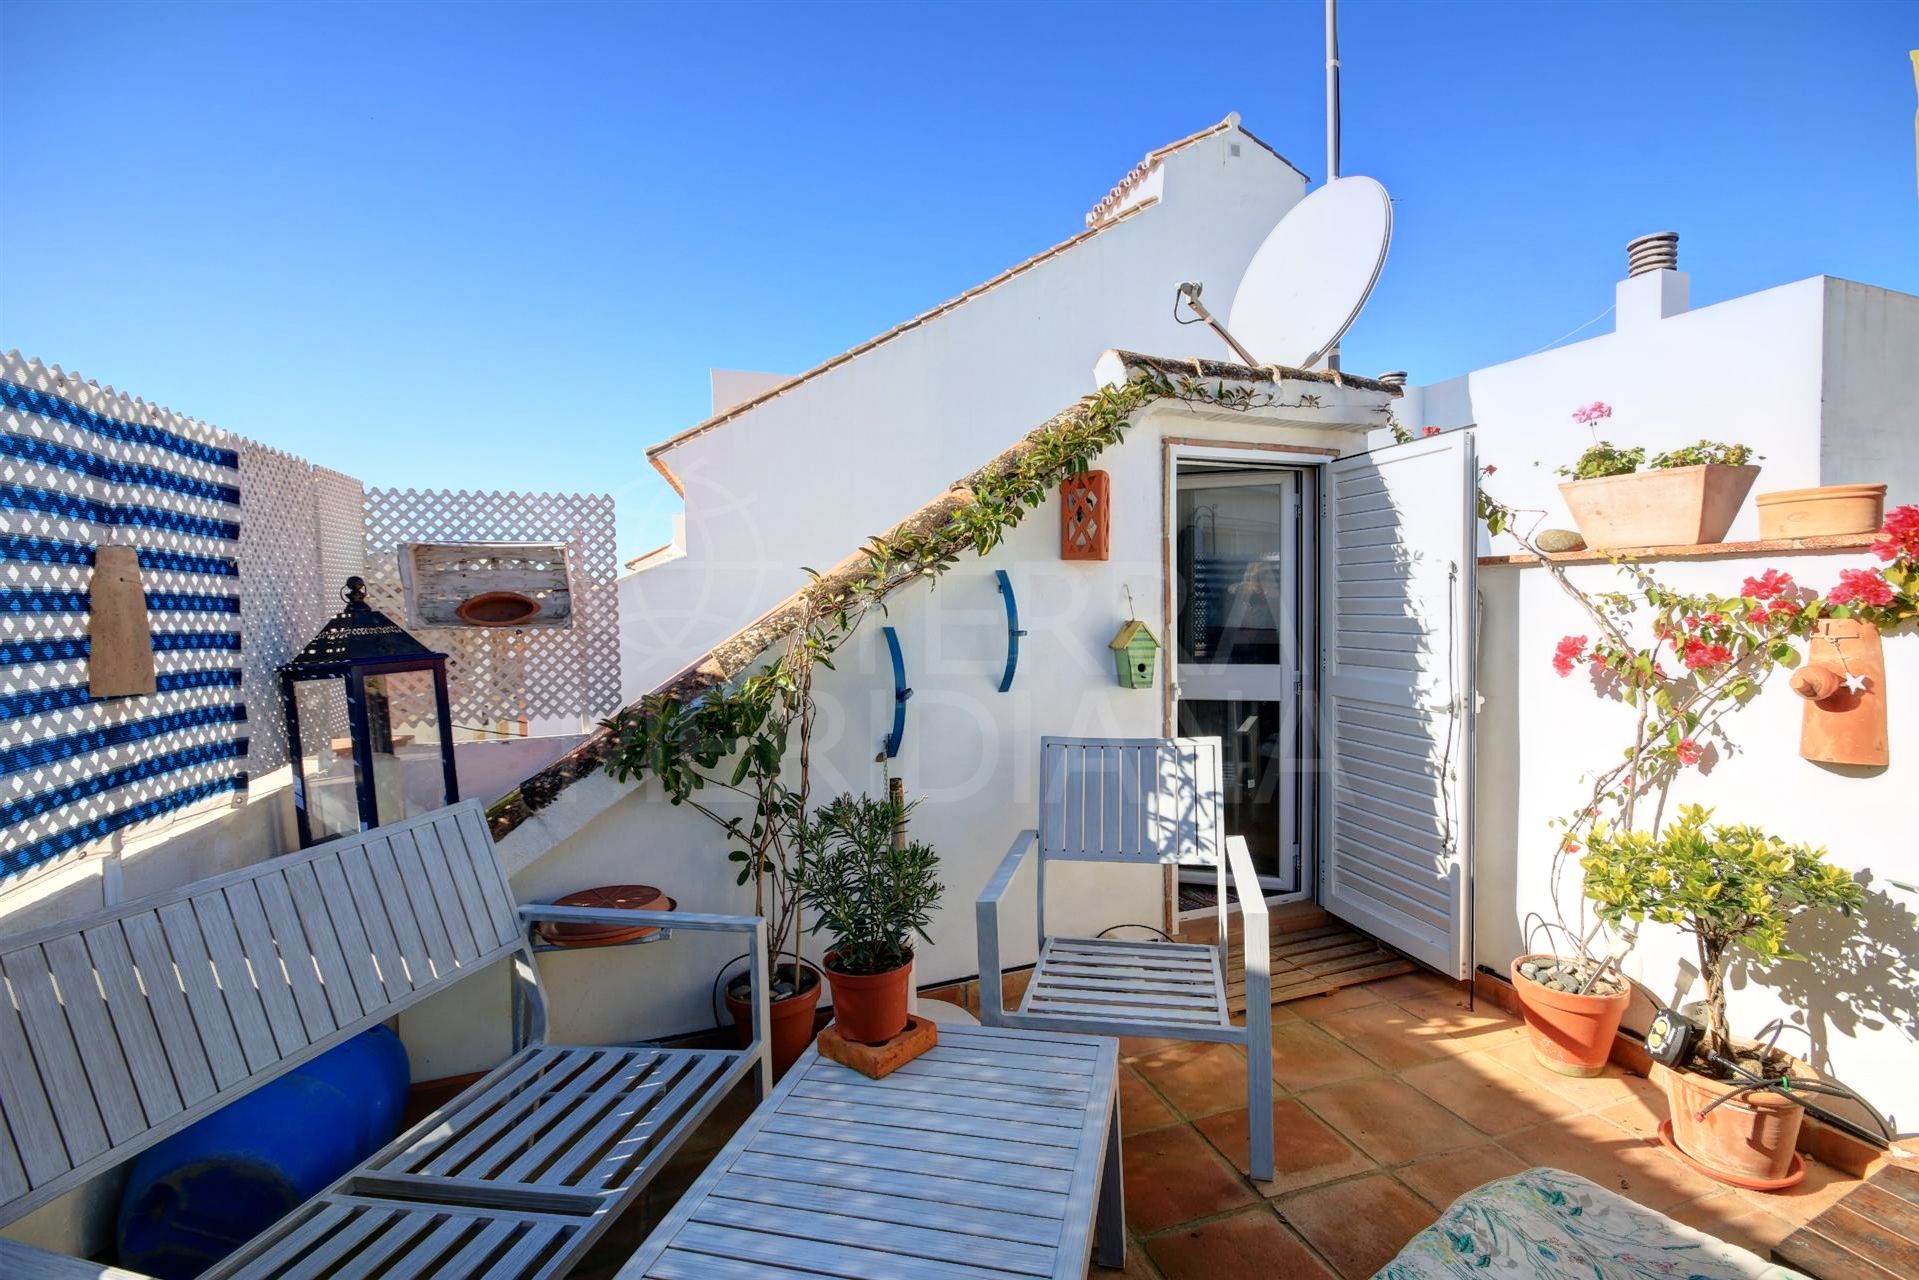 Very charming townhouse for sale in move in condition, located in the old town center of Estepona